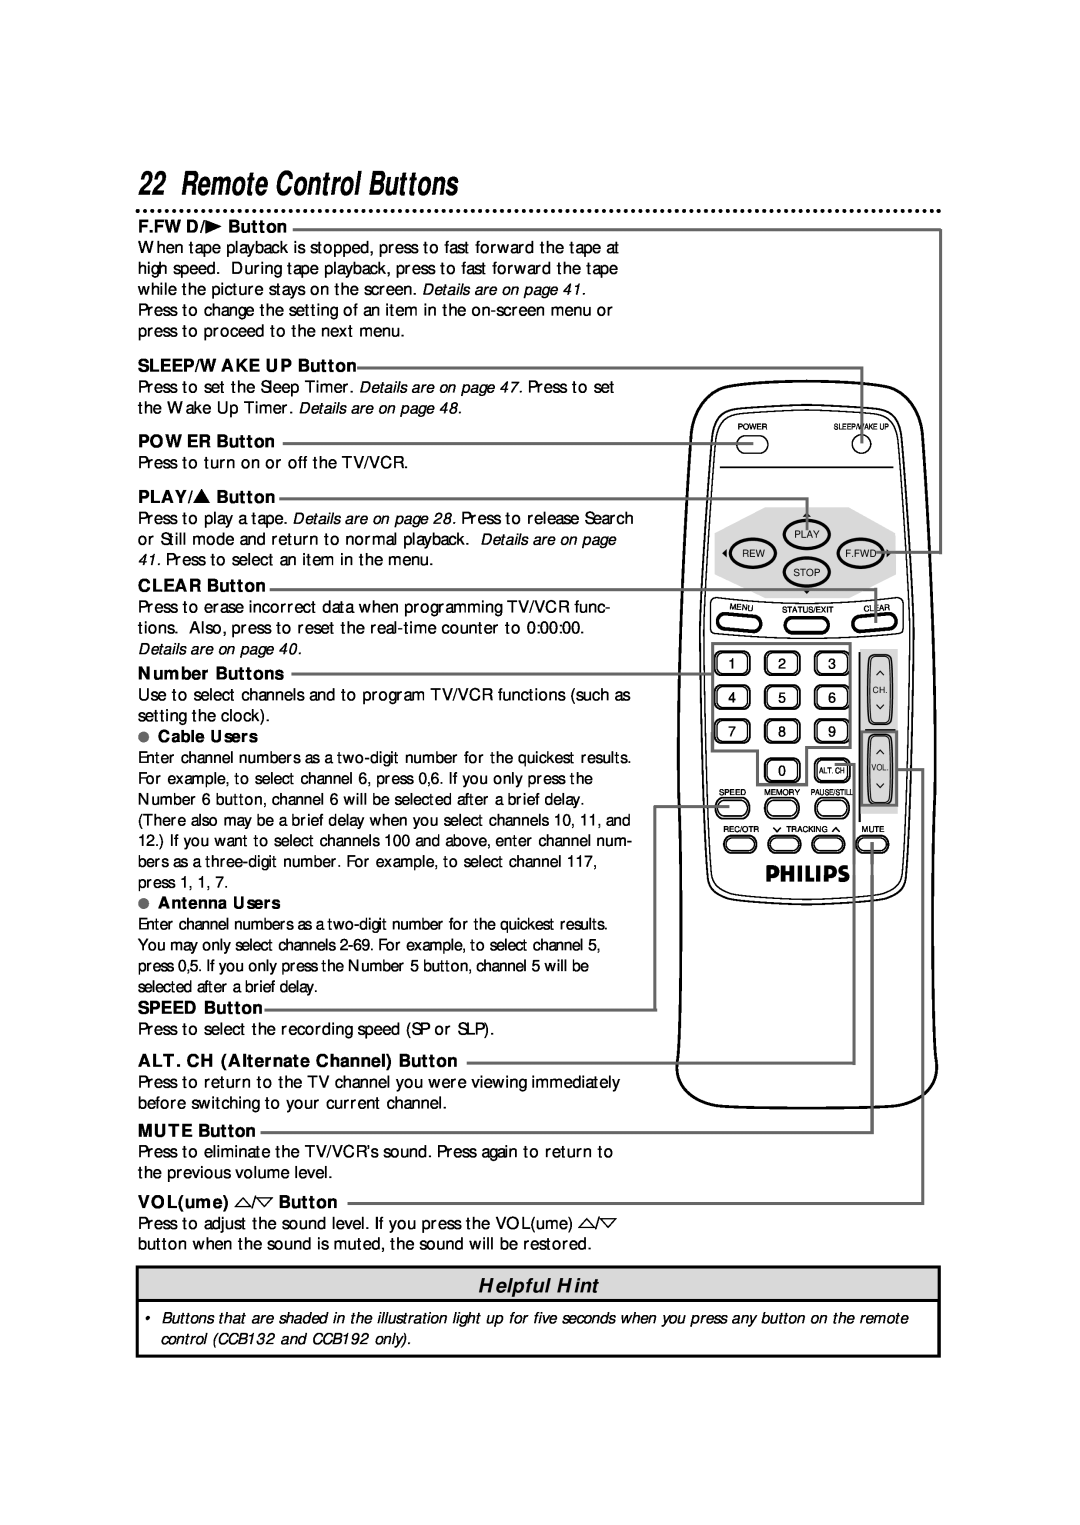 Philips CCB 192AT, CCB 132AT, CCB190AT owner manual Remote Control Buttons, Helpful Hint, Play Rewf.Fwd Stop 